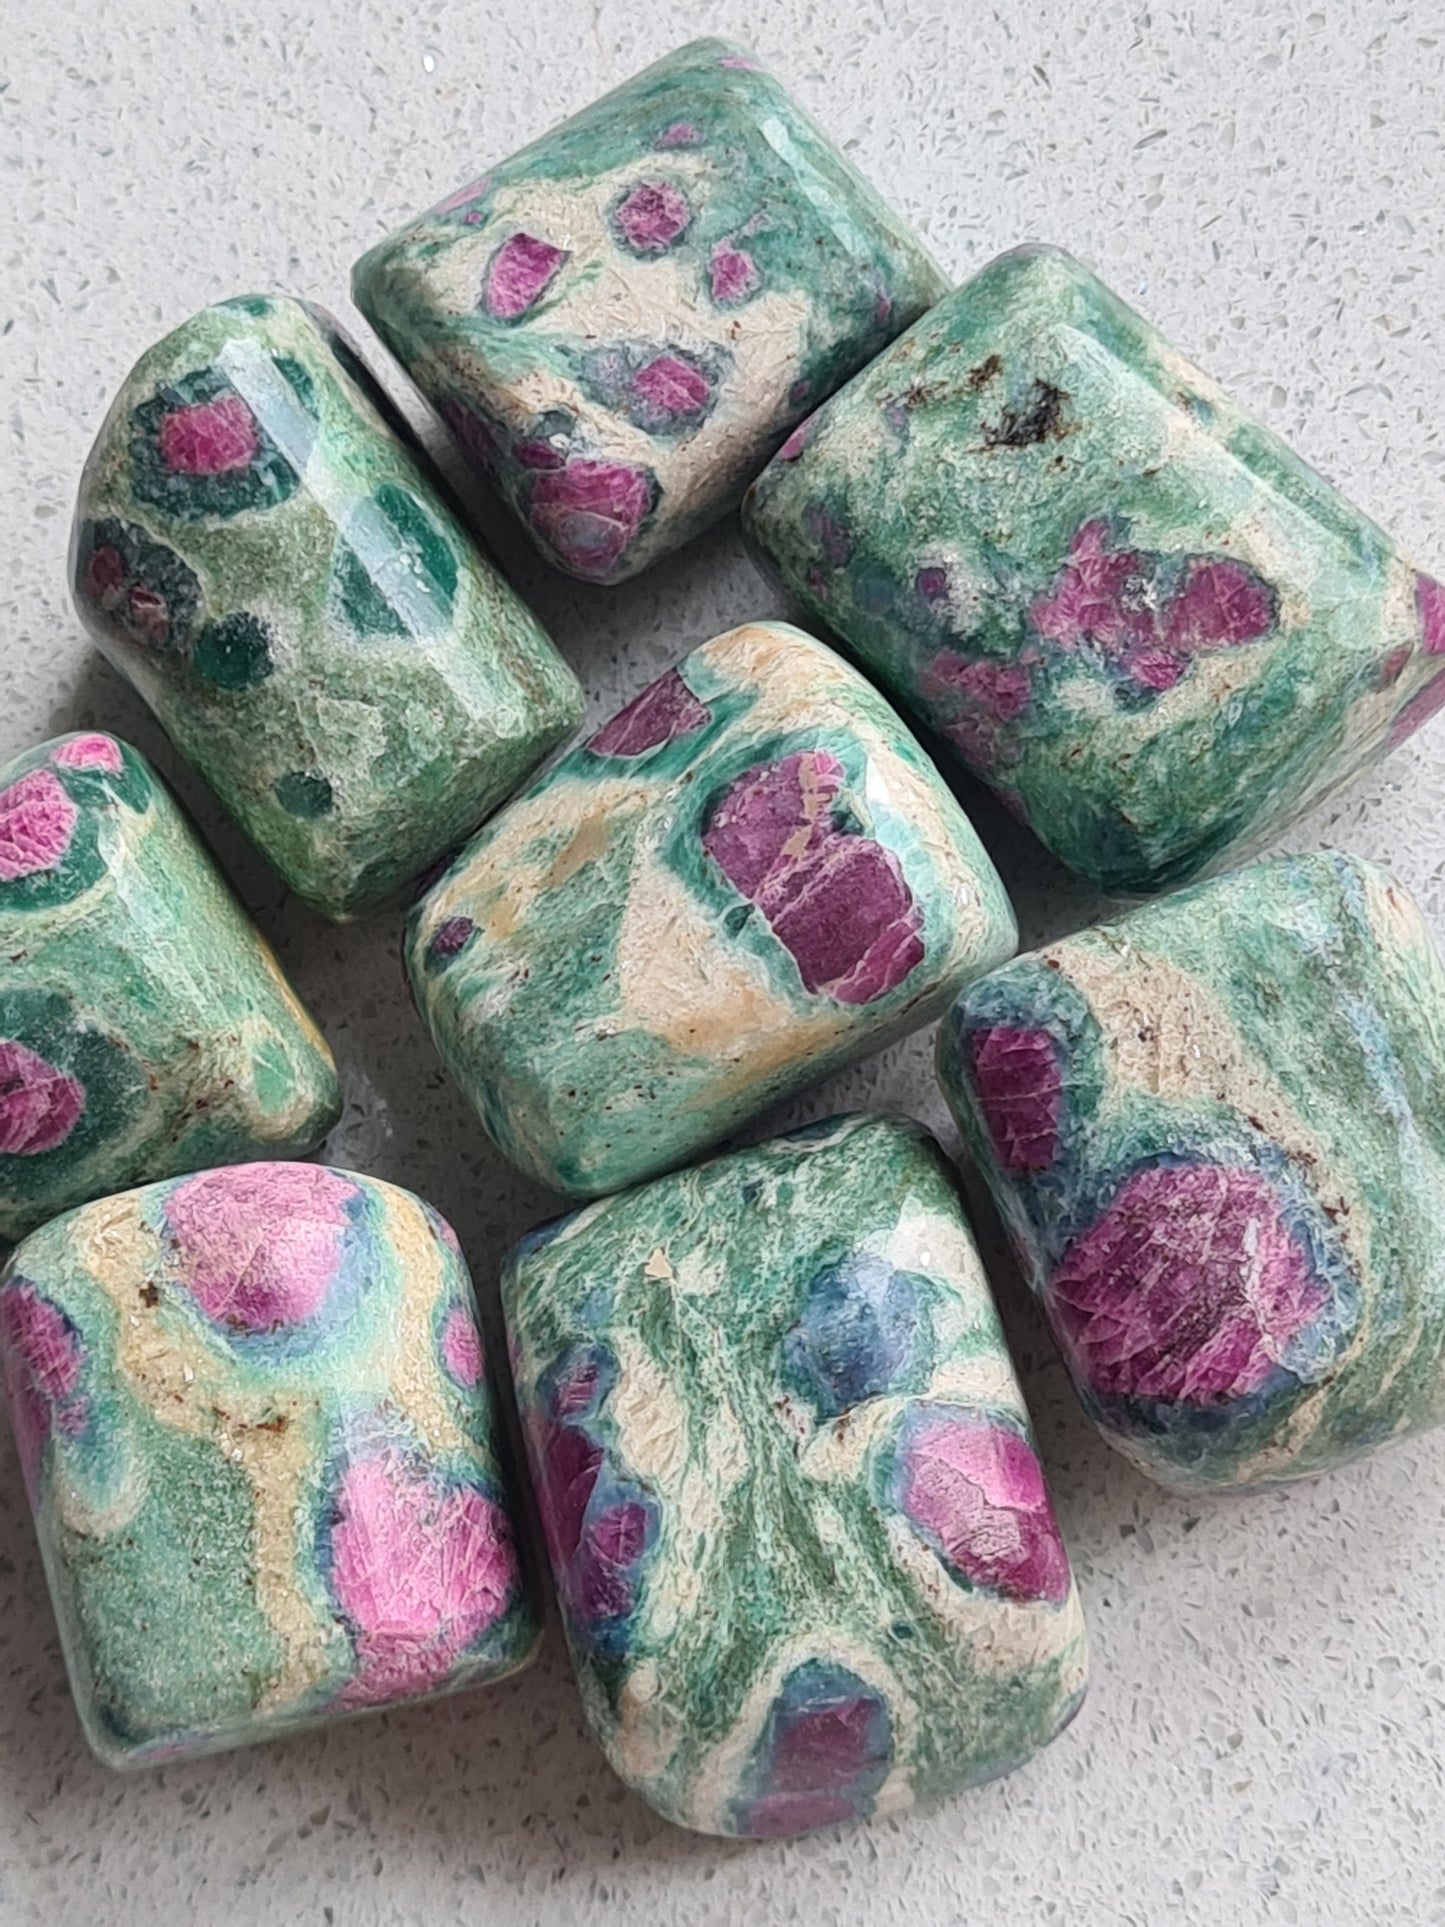 Ruby in Fuchsite Tumble stone from India. Greeb Fuchsite with Pinky Ruby for Passion and Spontineity.